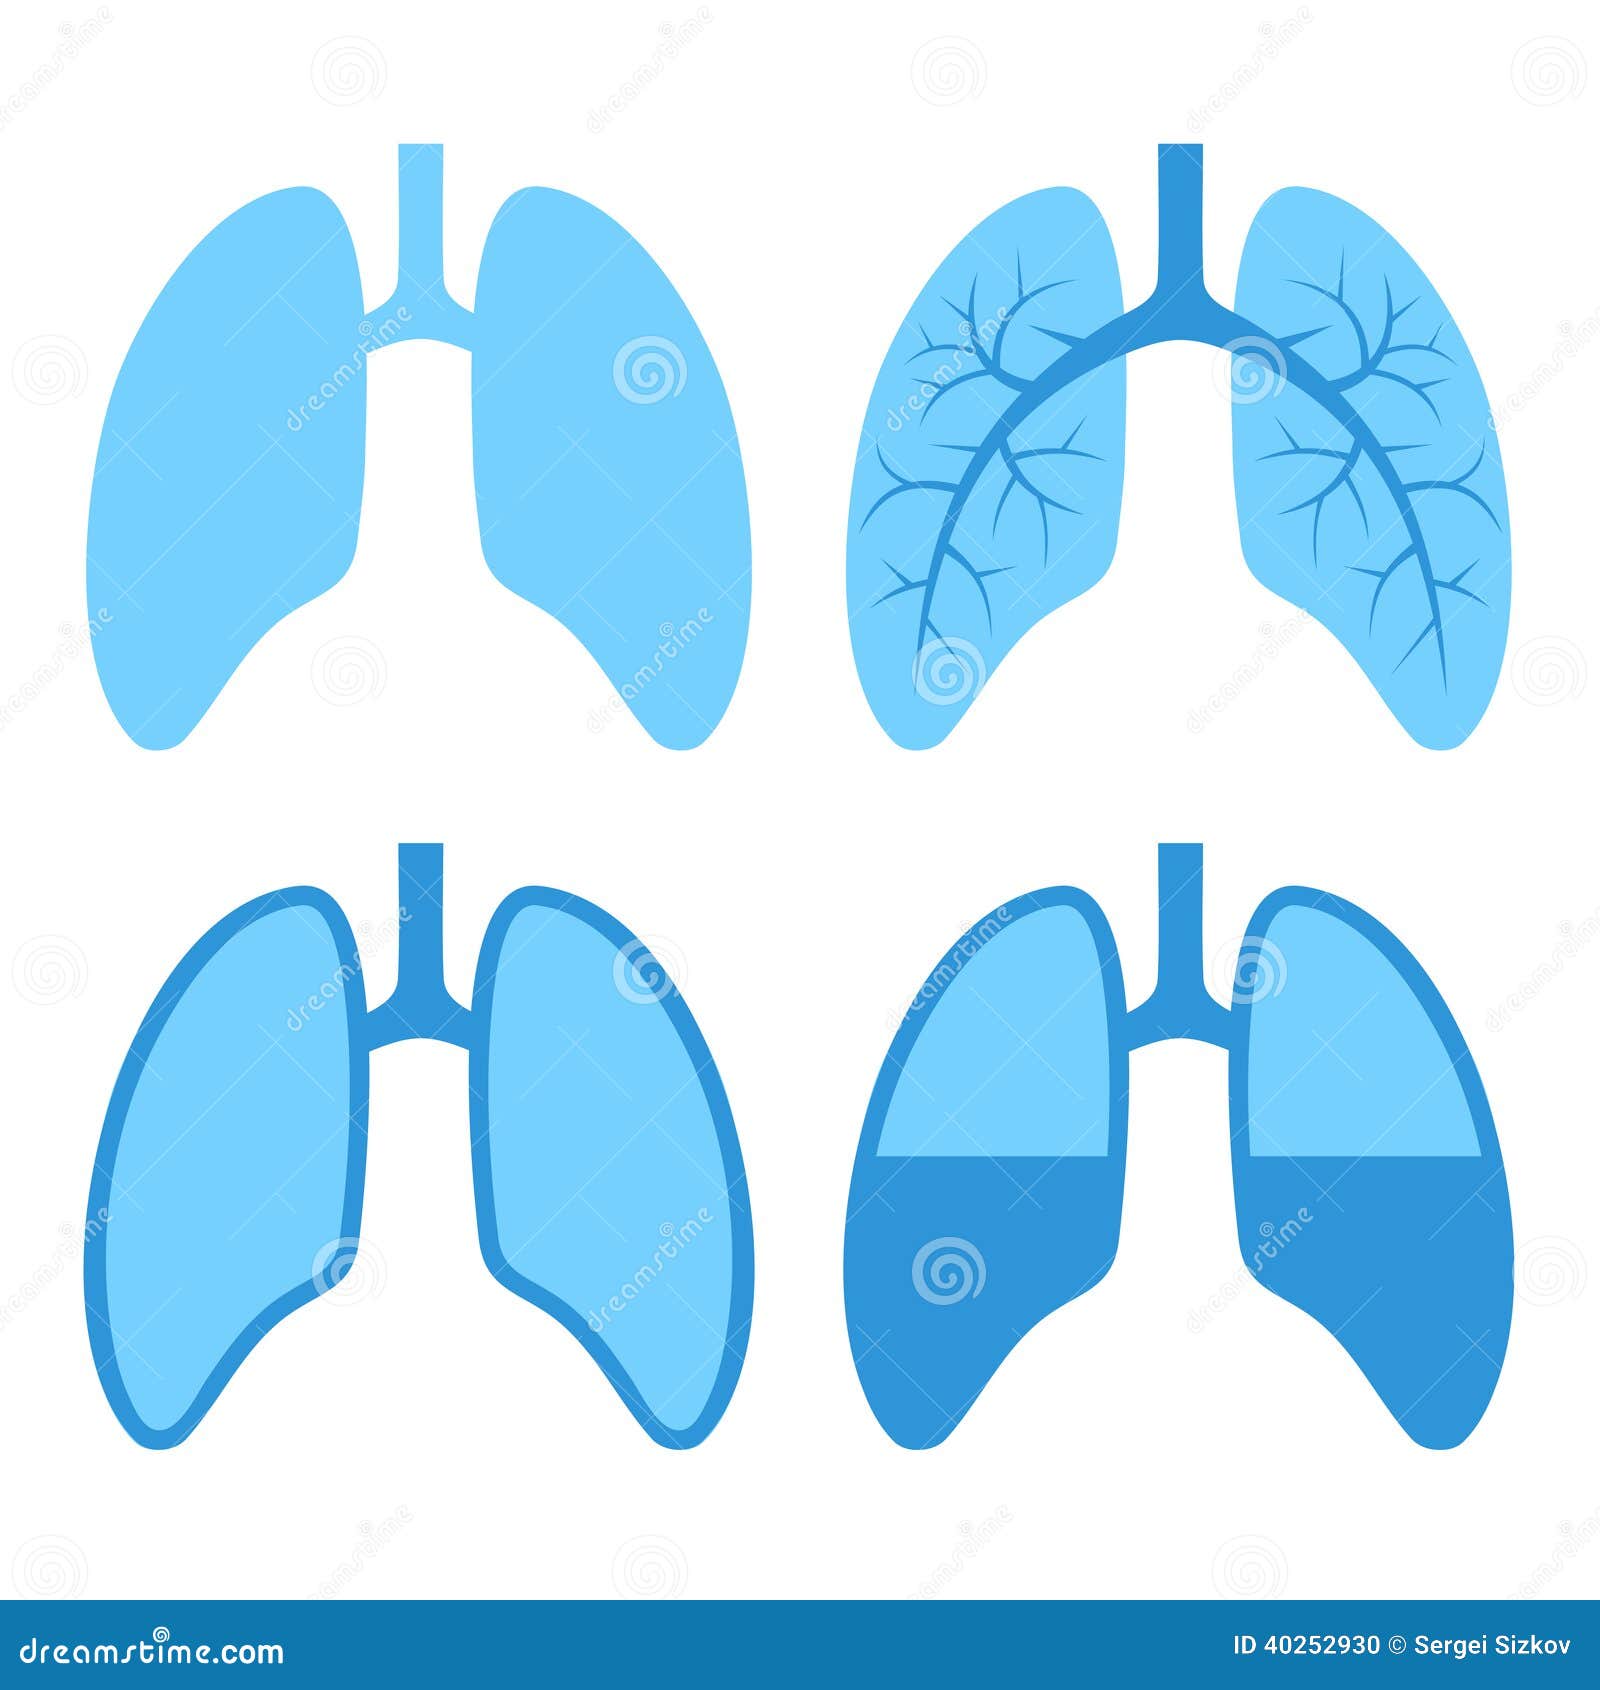 lungs clipart vector - photo #8